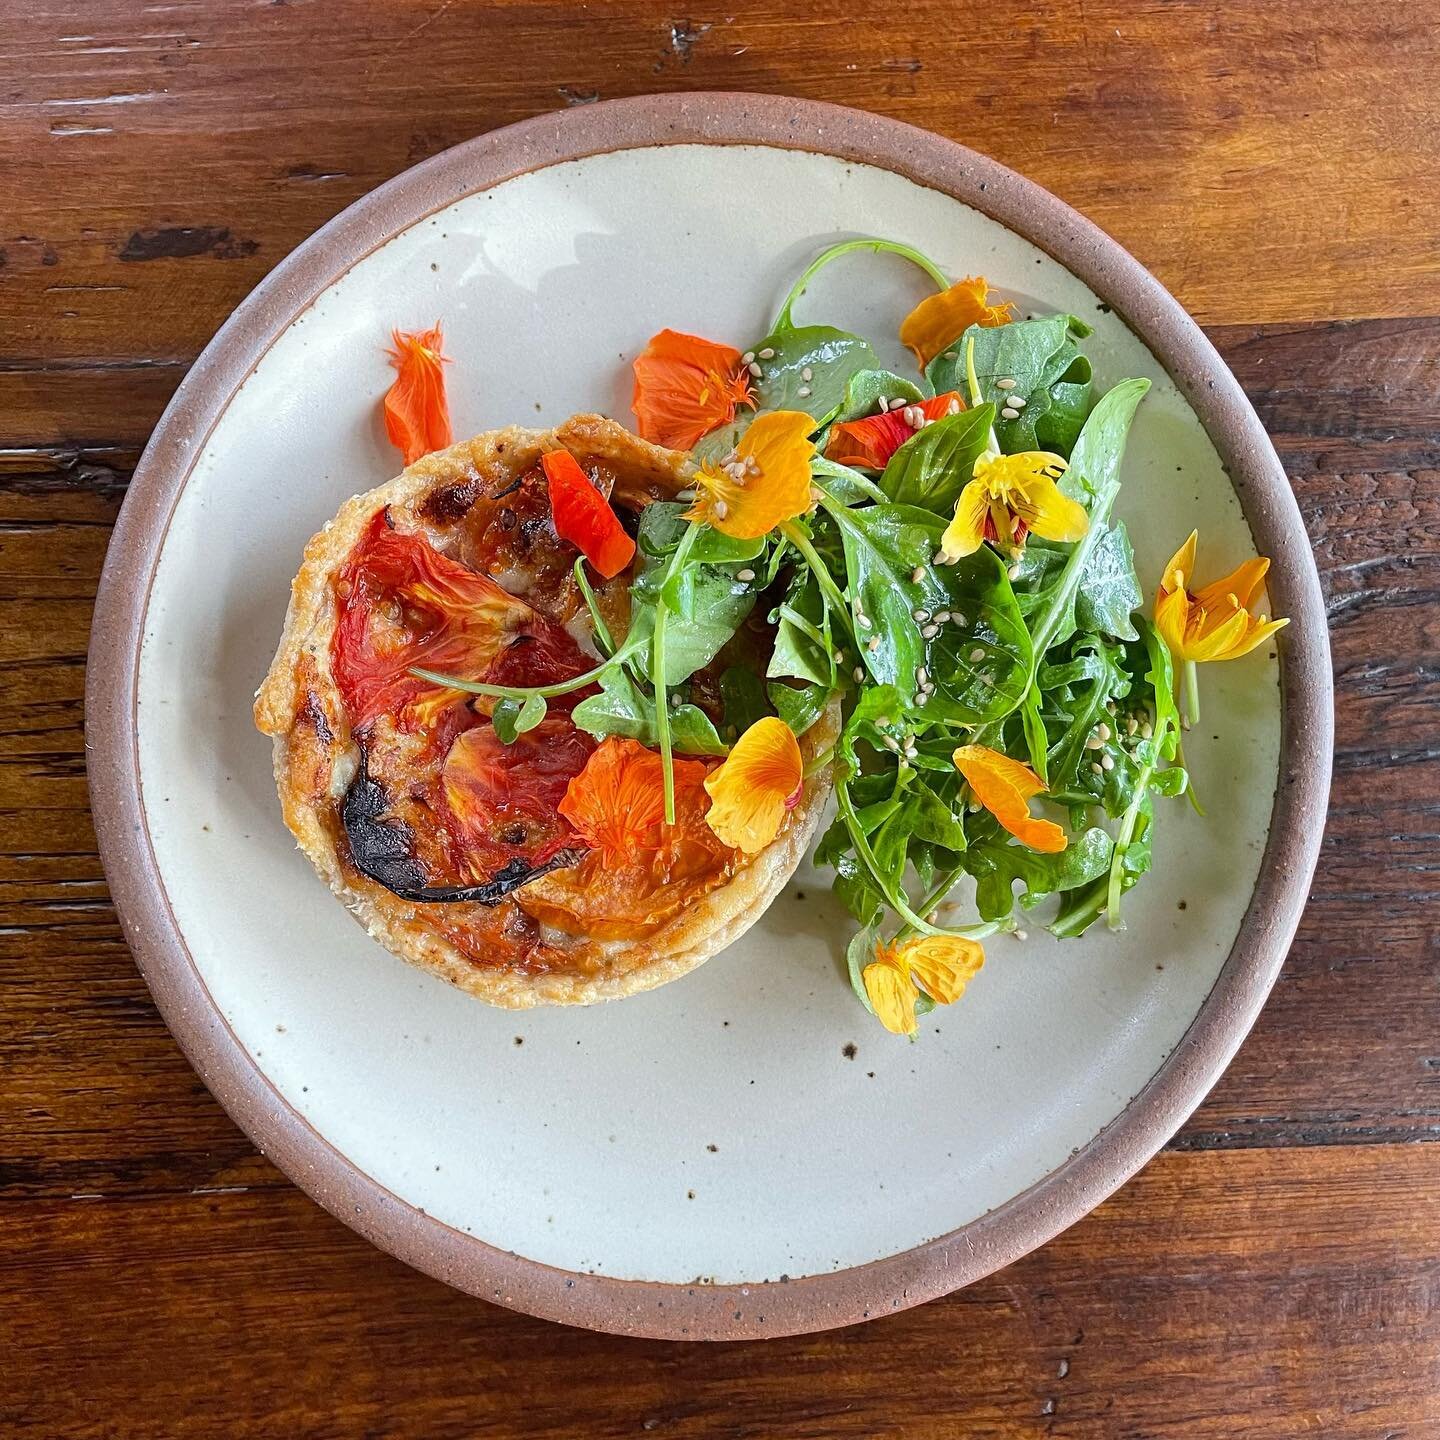 ✨James&rsquo; Tomato Pie✨ Heirloom tomatoes, tellegio, parm, cress basil &amp; arugula salad &bull; This beaut is on special while supplies last! ⚡️🍅⚡️